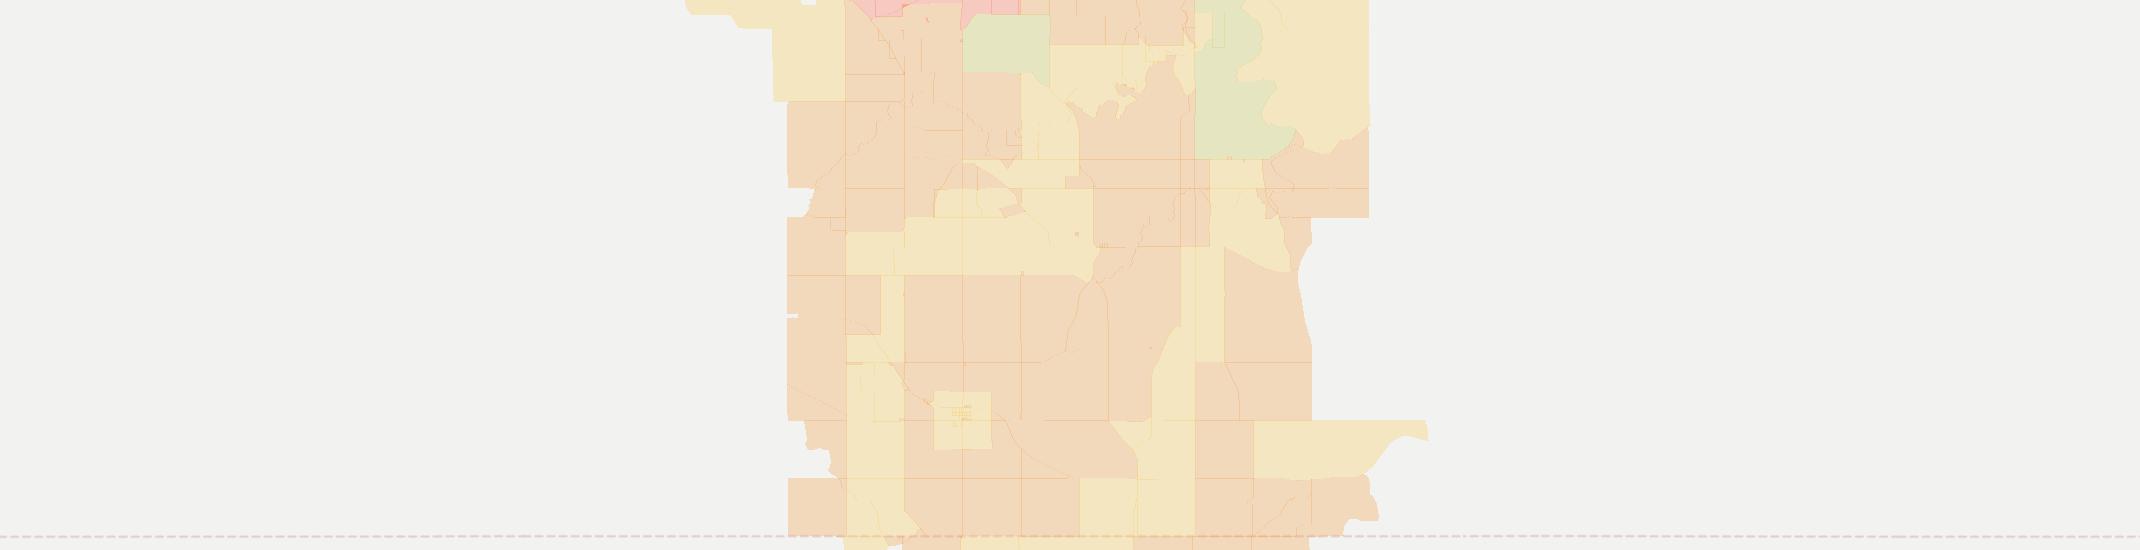 Canton Internet Competition Map. Click for interactive map.